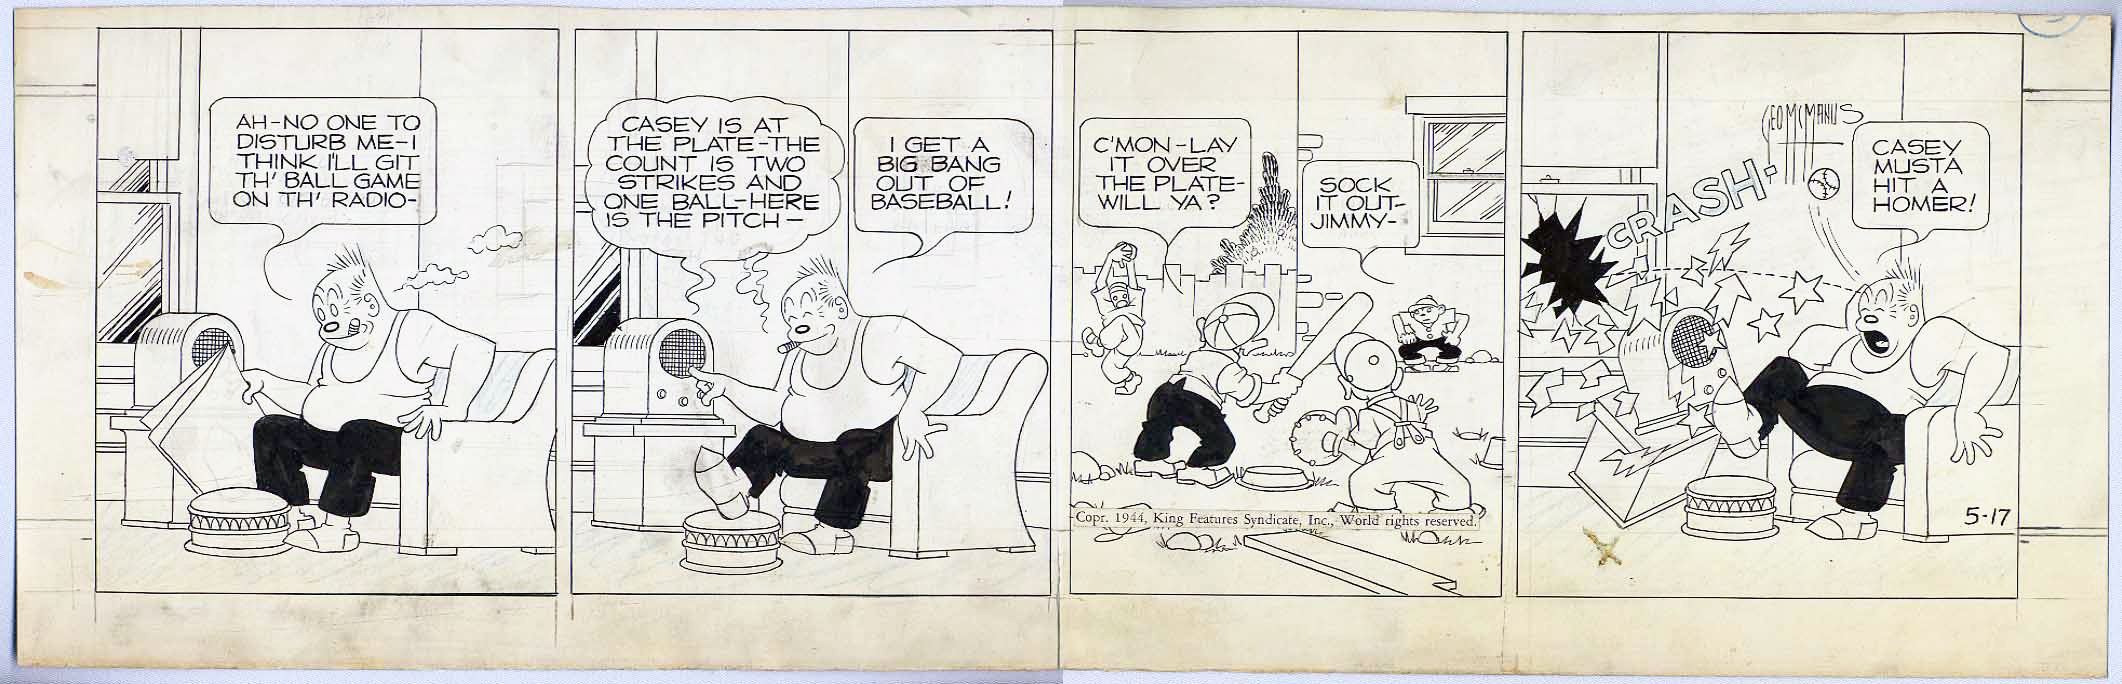 Bringing Up Father (05/17/44) by George McManus, in Brian Coppola's Strip  Art Comic Art Gallery Room